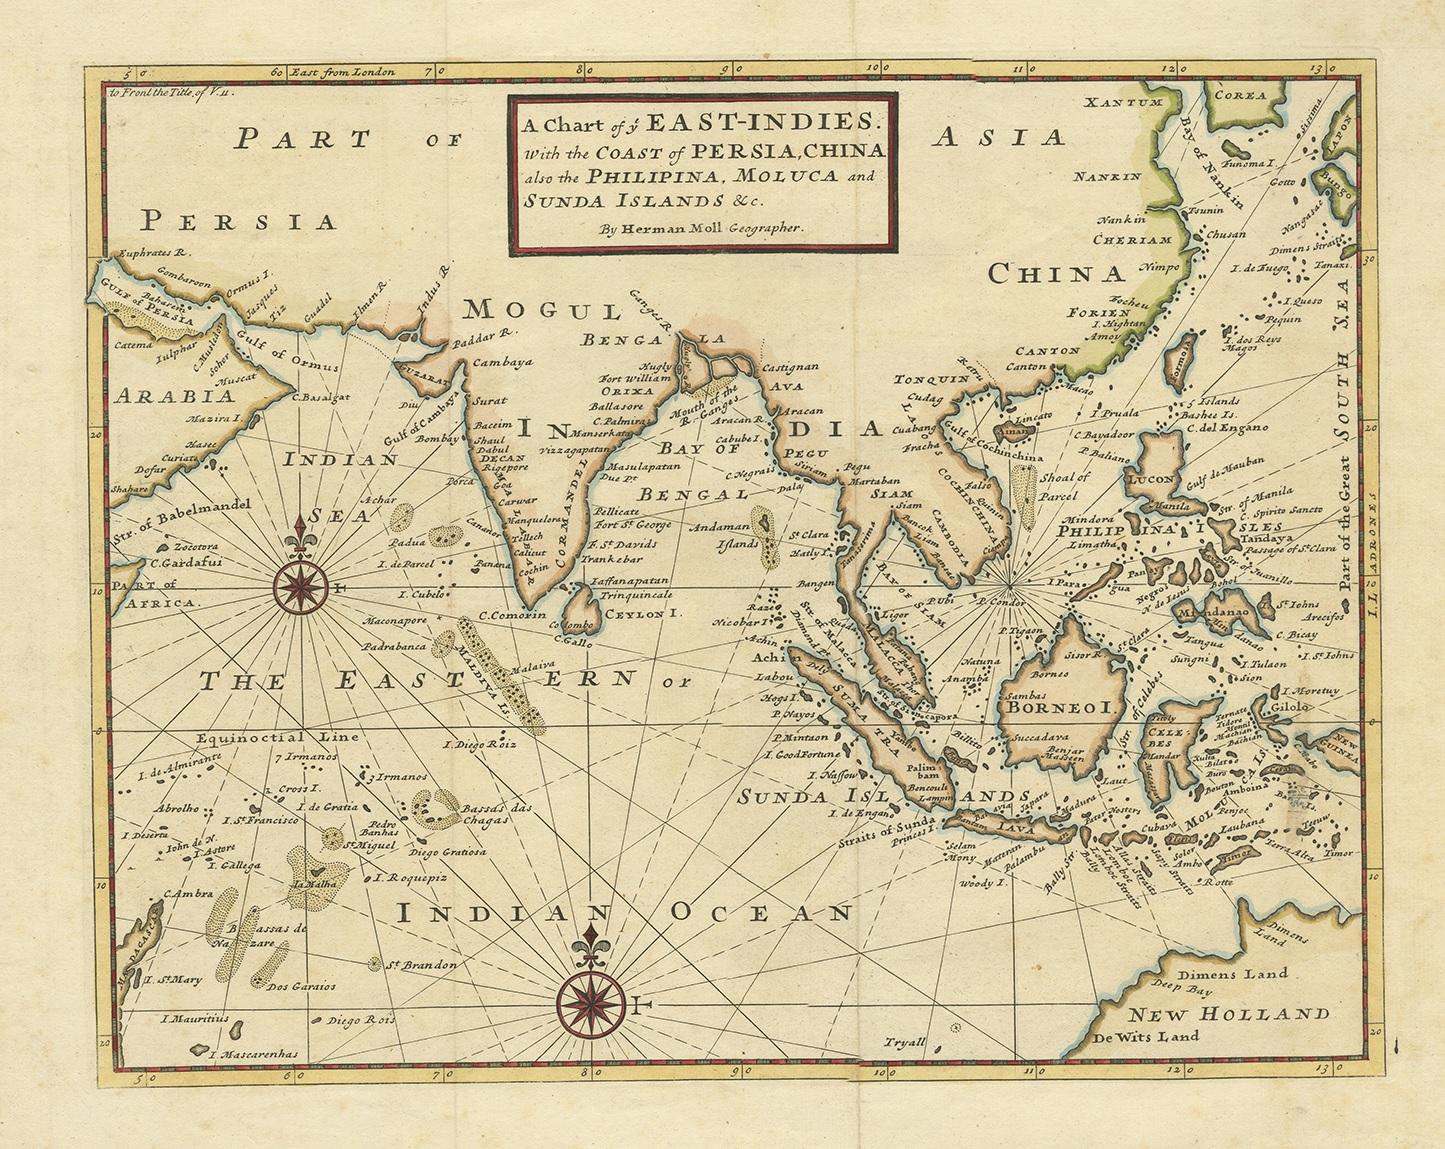 Antique map titled 'A Chart of ye East-Indies. With the Coast of Persia, China also the Philipina, Moluca and Sunda Islands'. Detailed map of the Indian Ocean, Southeast Asia, China, Formosa, the Philippines and part of Australia. This map